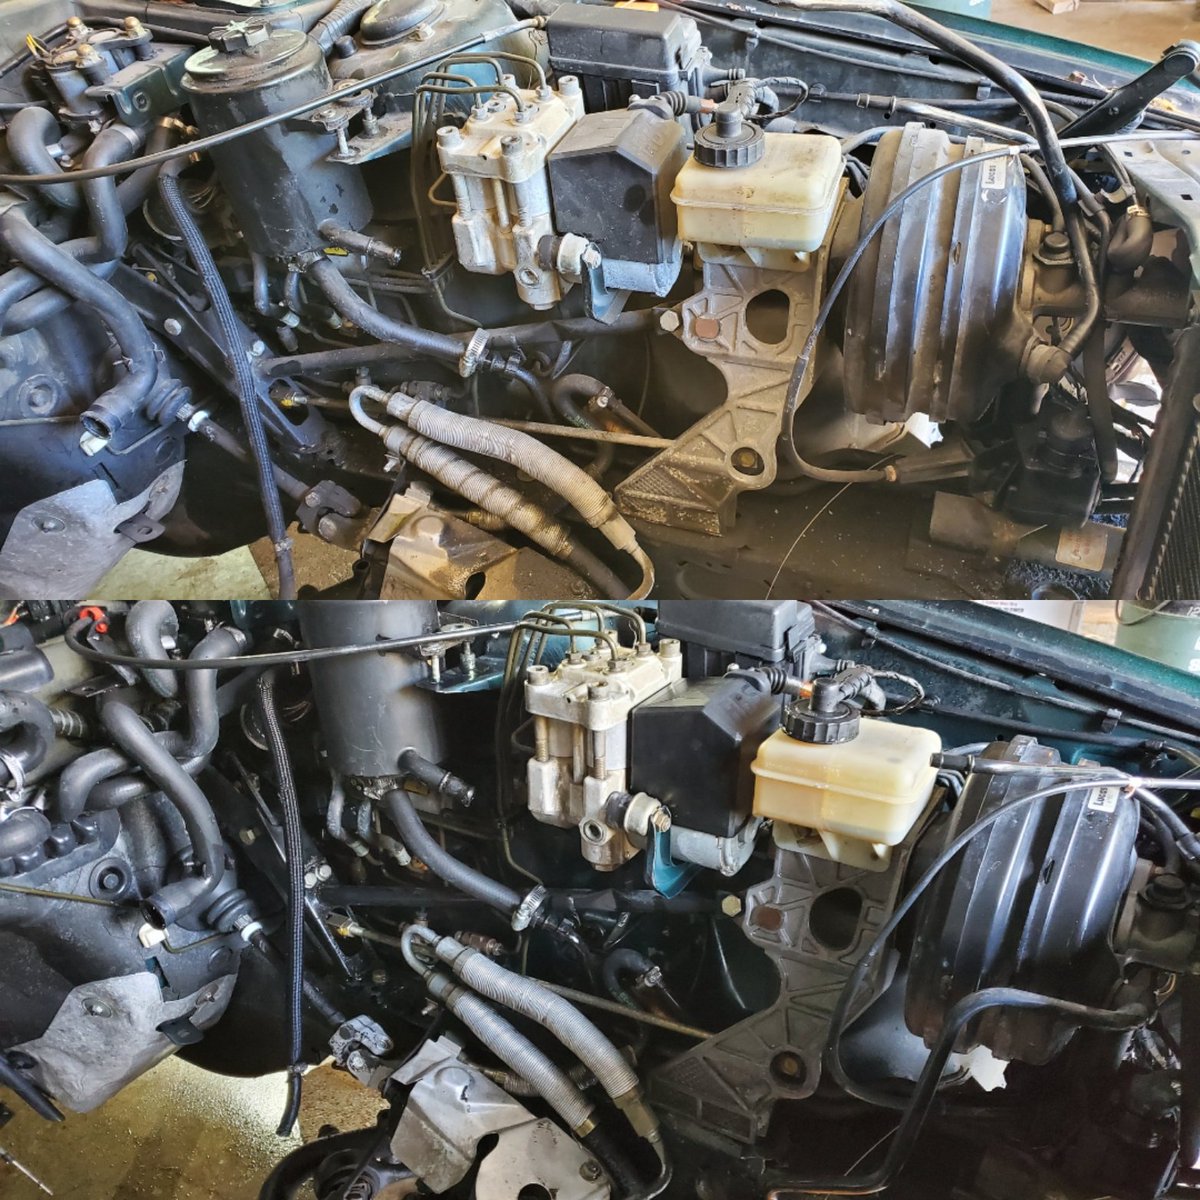 Cleaned the engine bay today in preparation to drop the new engine in tomorrow. Mixture of pressure washing and steam. I cover this process in this DIY: http://www.mandbdetailing.com/diy/2018/6/21/cleaning-your-engine-bay